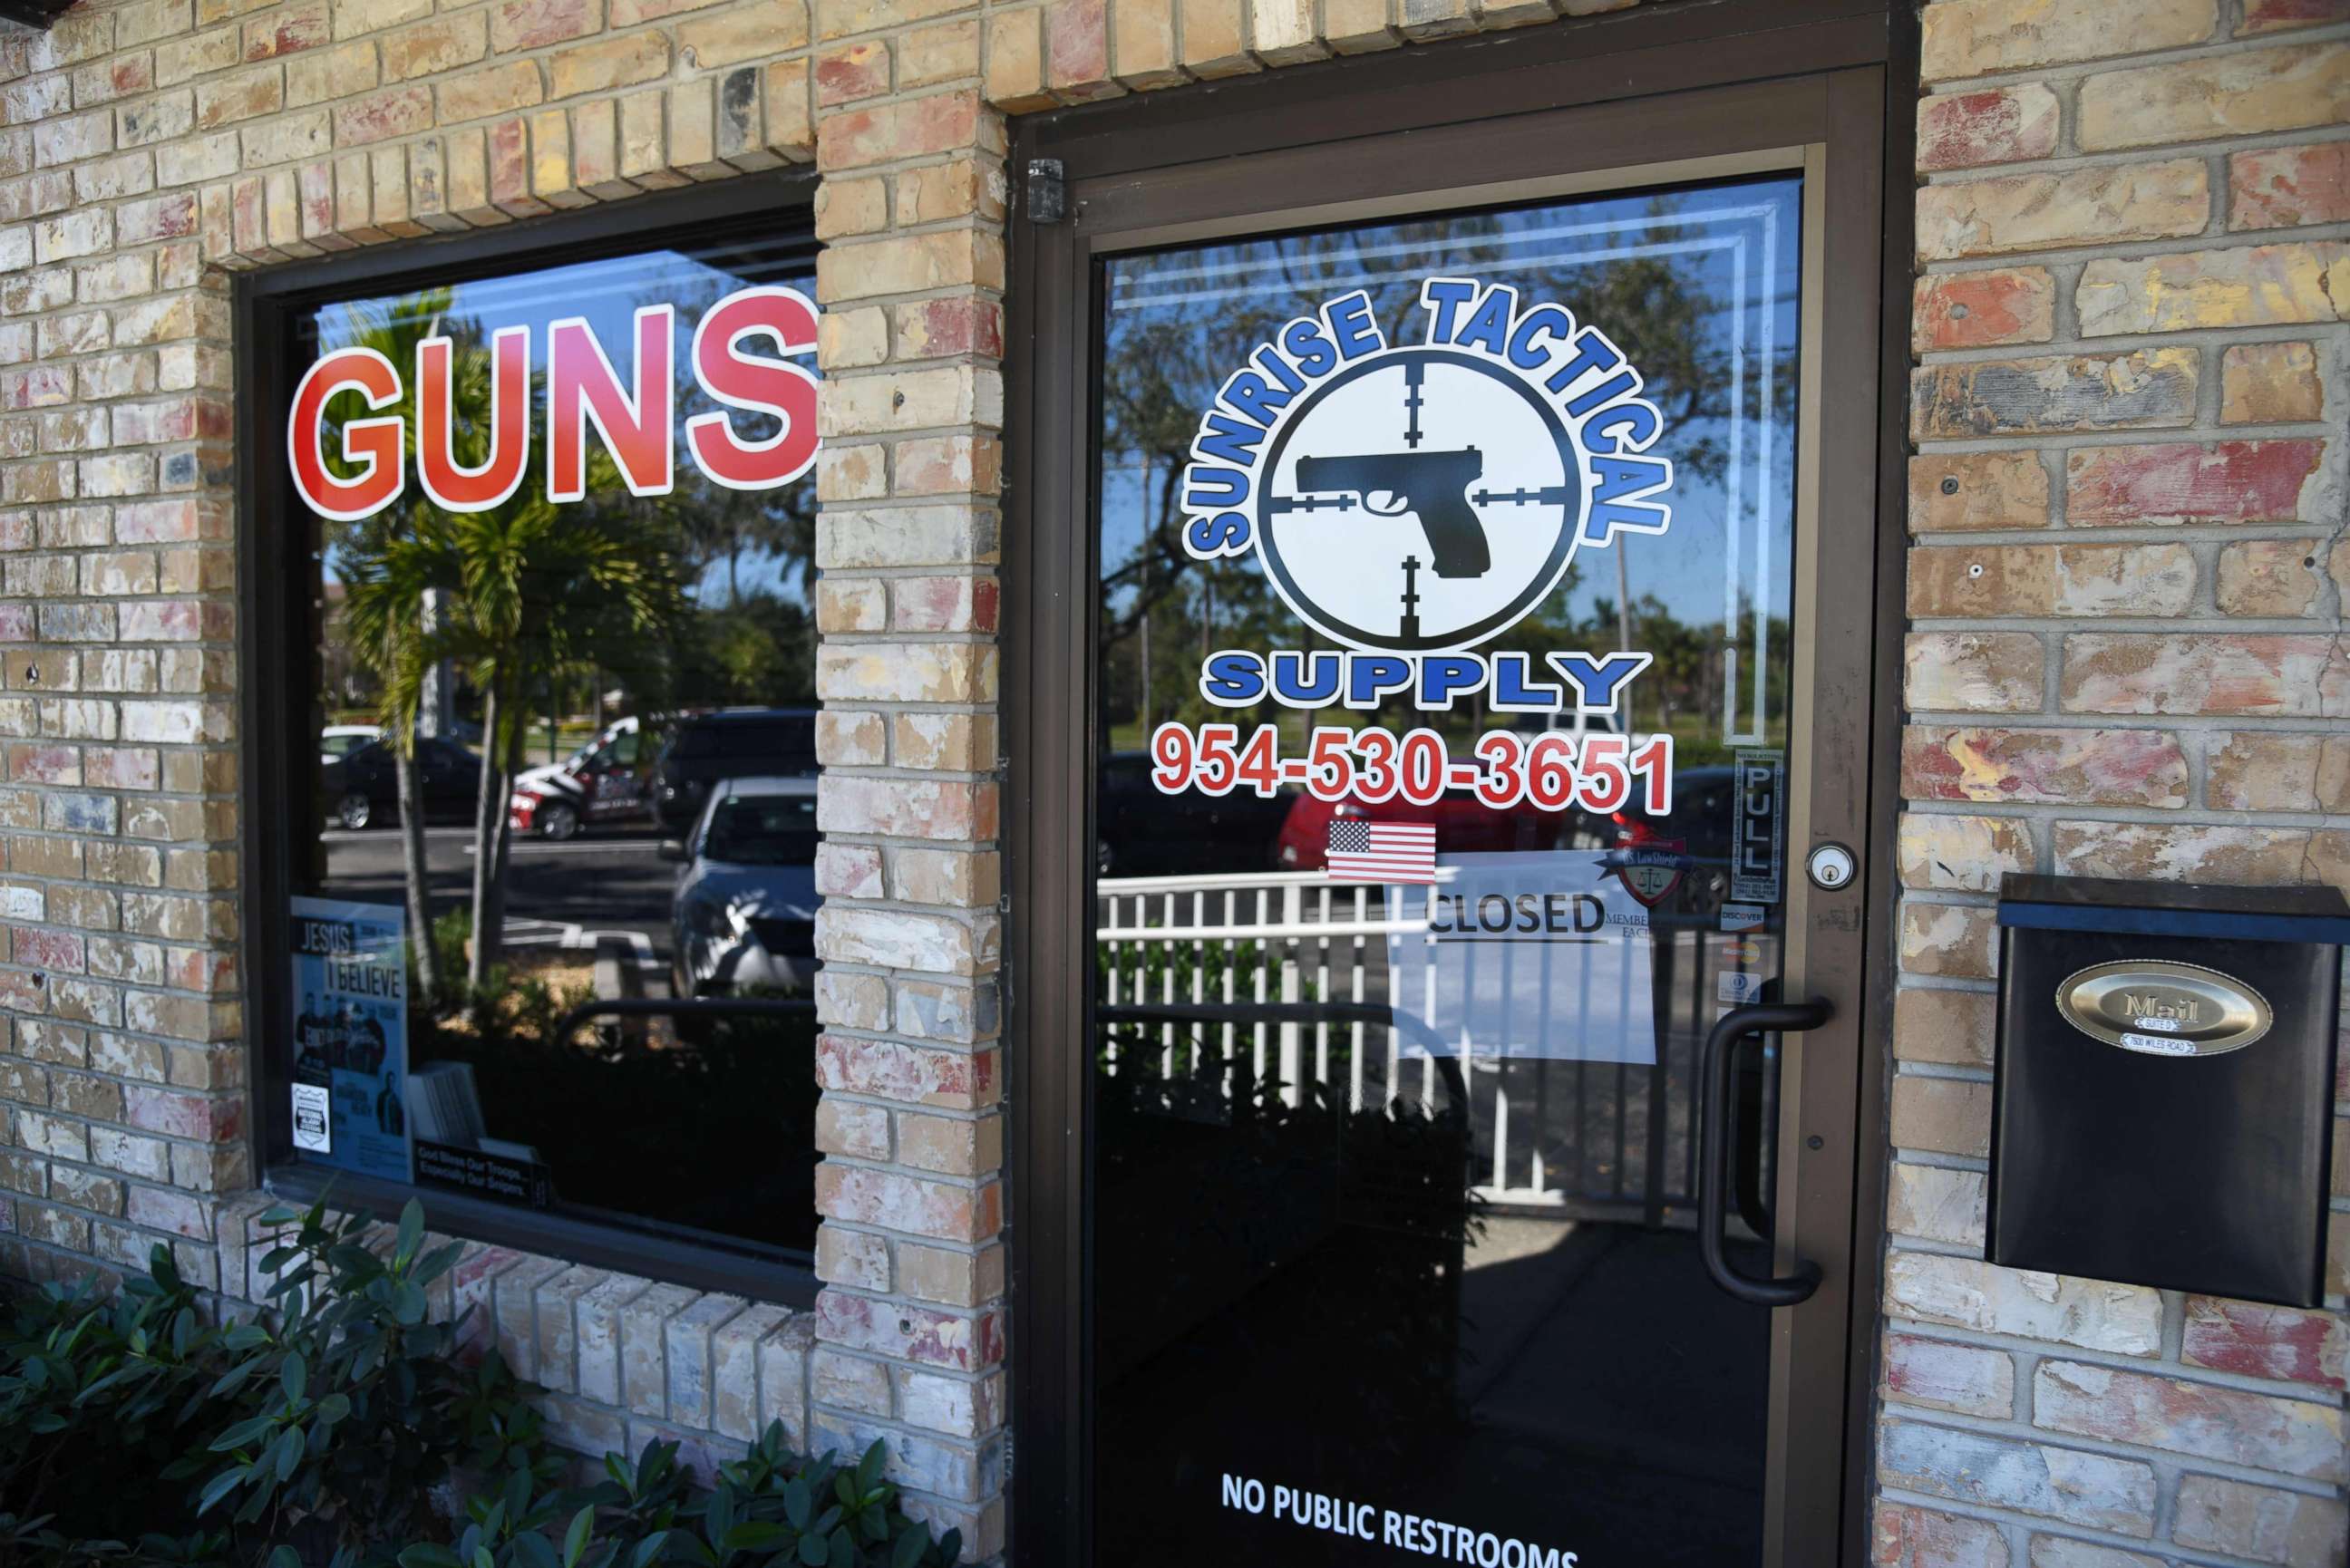 PHOTO: Outside view of Sunrise Tactical Supply store in Coral Springs, Fla. on Feb. 16, 2018 where accused school shooter Nikolas Cruz bought an AR-15.